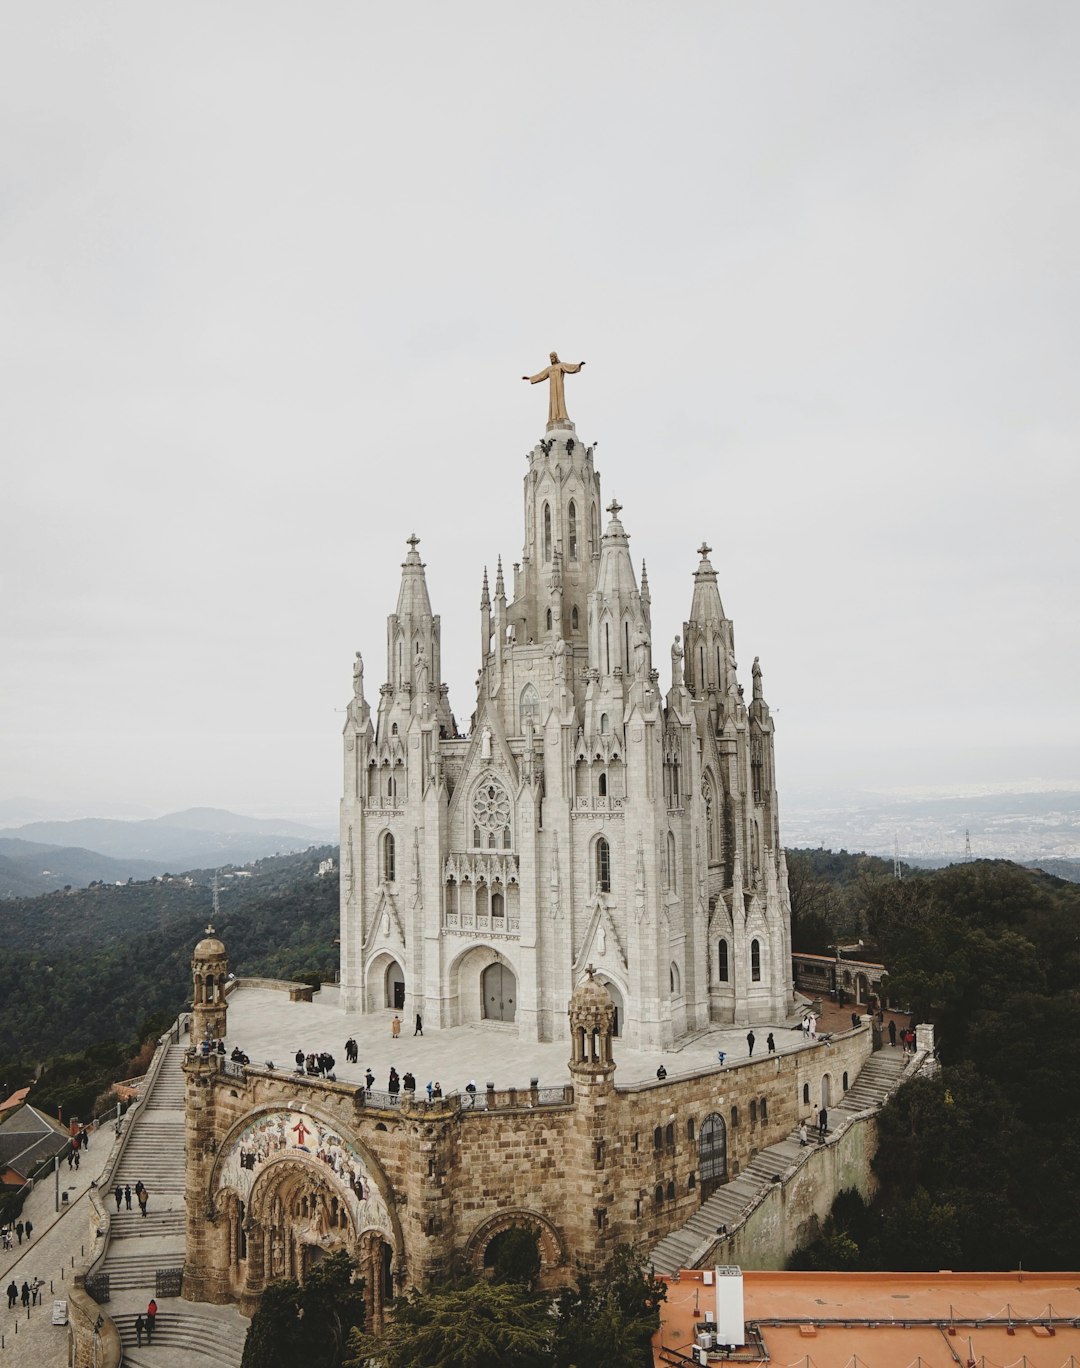 Travel Tips and Stories of Tibidabo Amusement Park in Spain